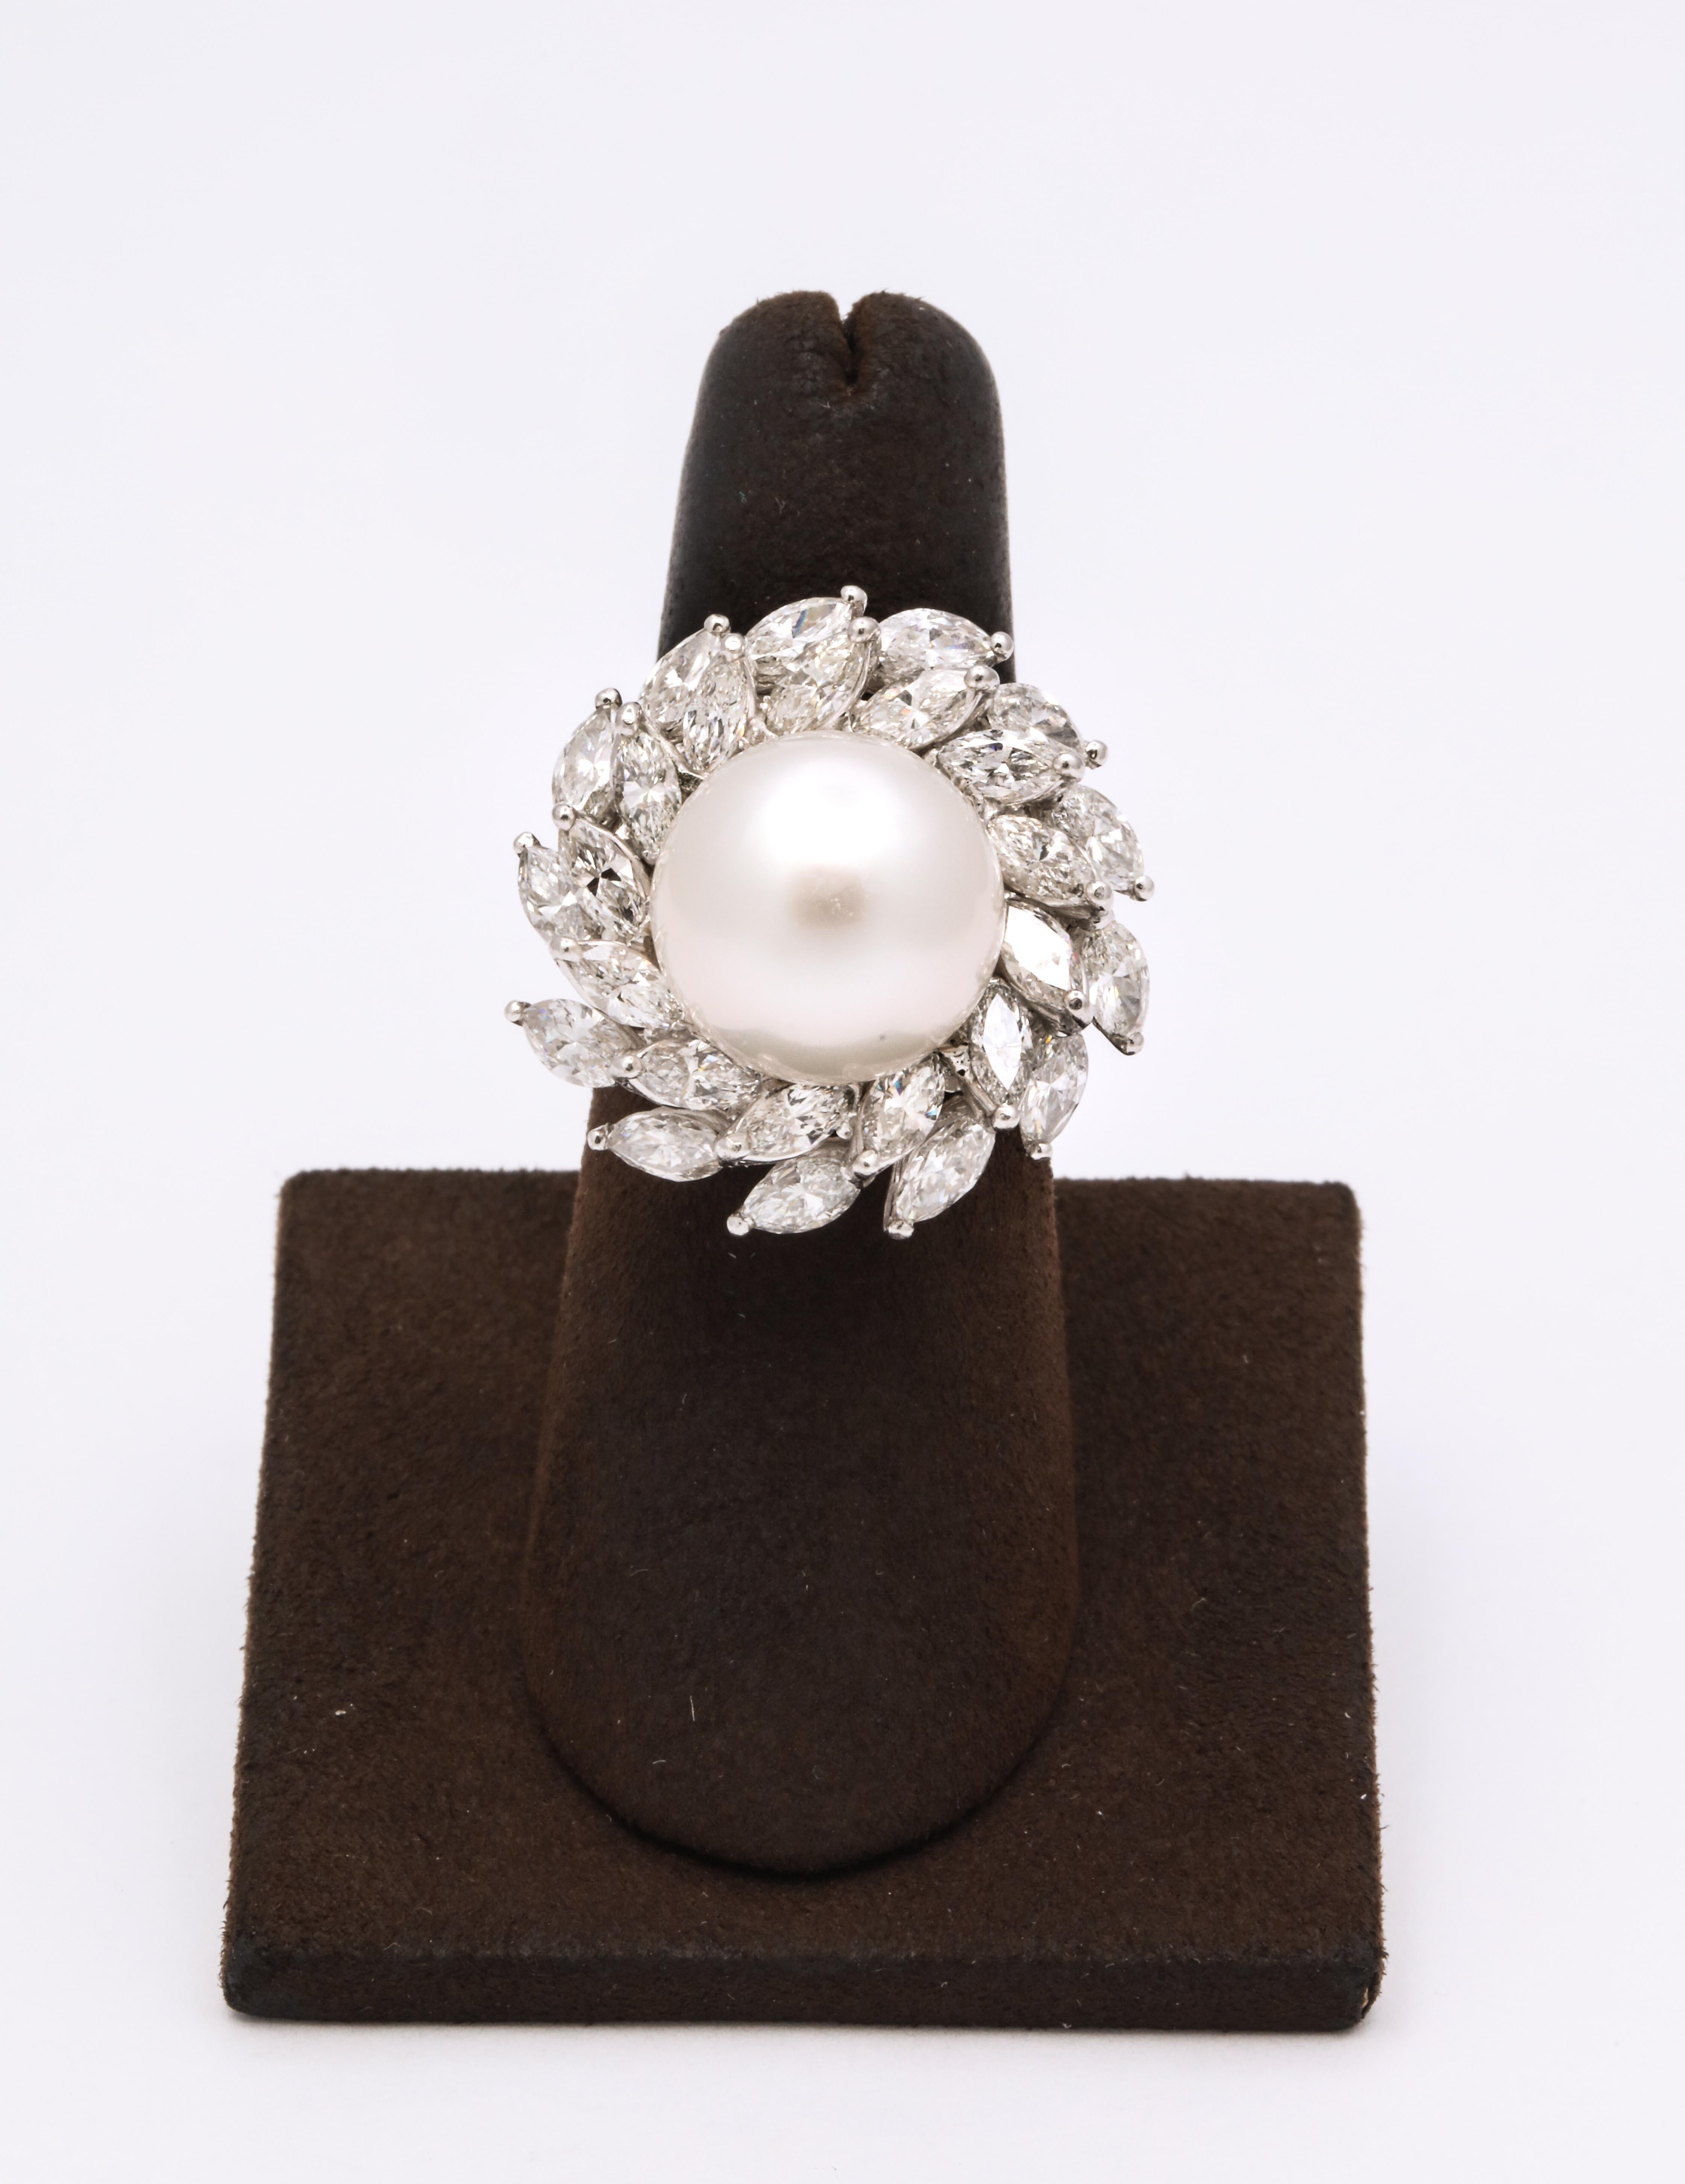 A stunning pearl surrounded by two rows of fabulous white marquise diamonds.

Approximately 13 mm south sea pearl 

6.12 carats of marquise cut diamonds

set in Platinum 

This beautiful ring is currently a size 6.25 but can be sized to any finger